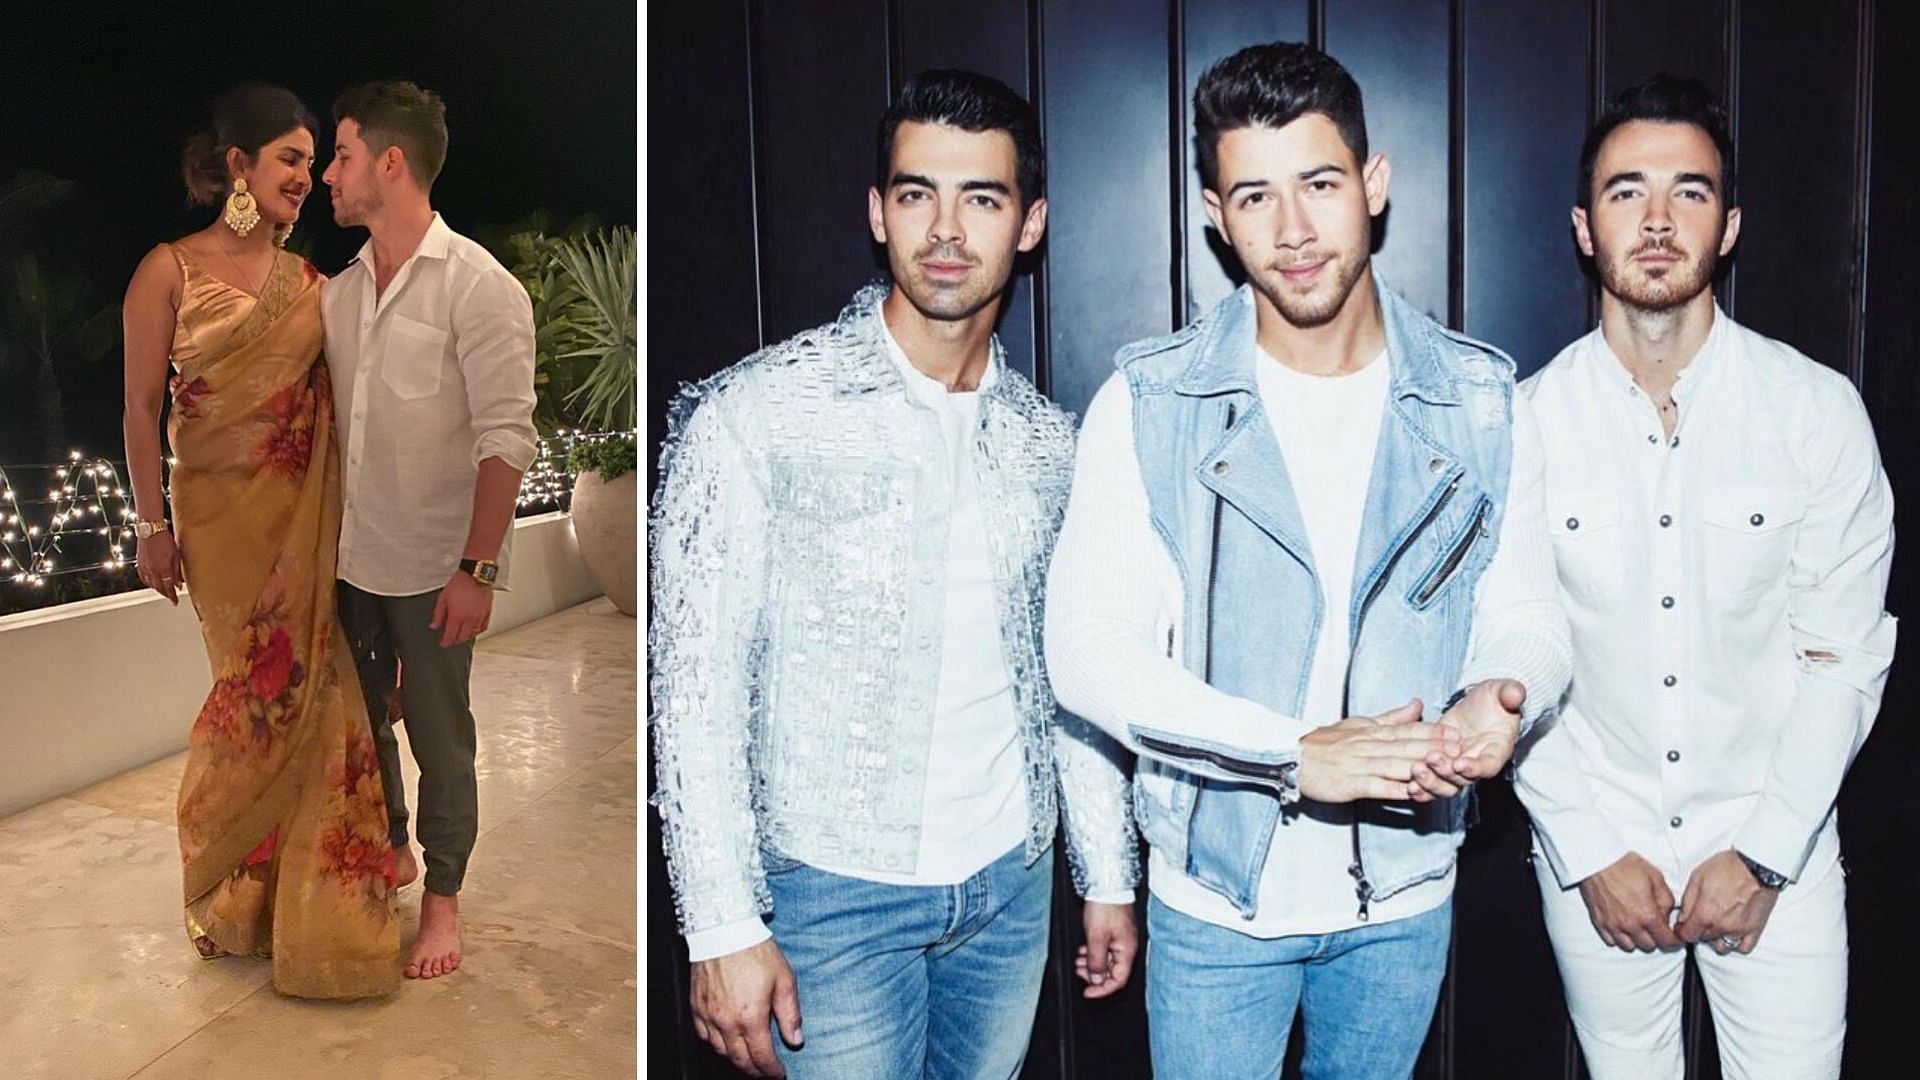 Priyanka took to social media to share a message of the Jonas brothers.